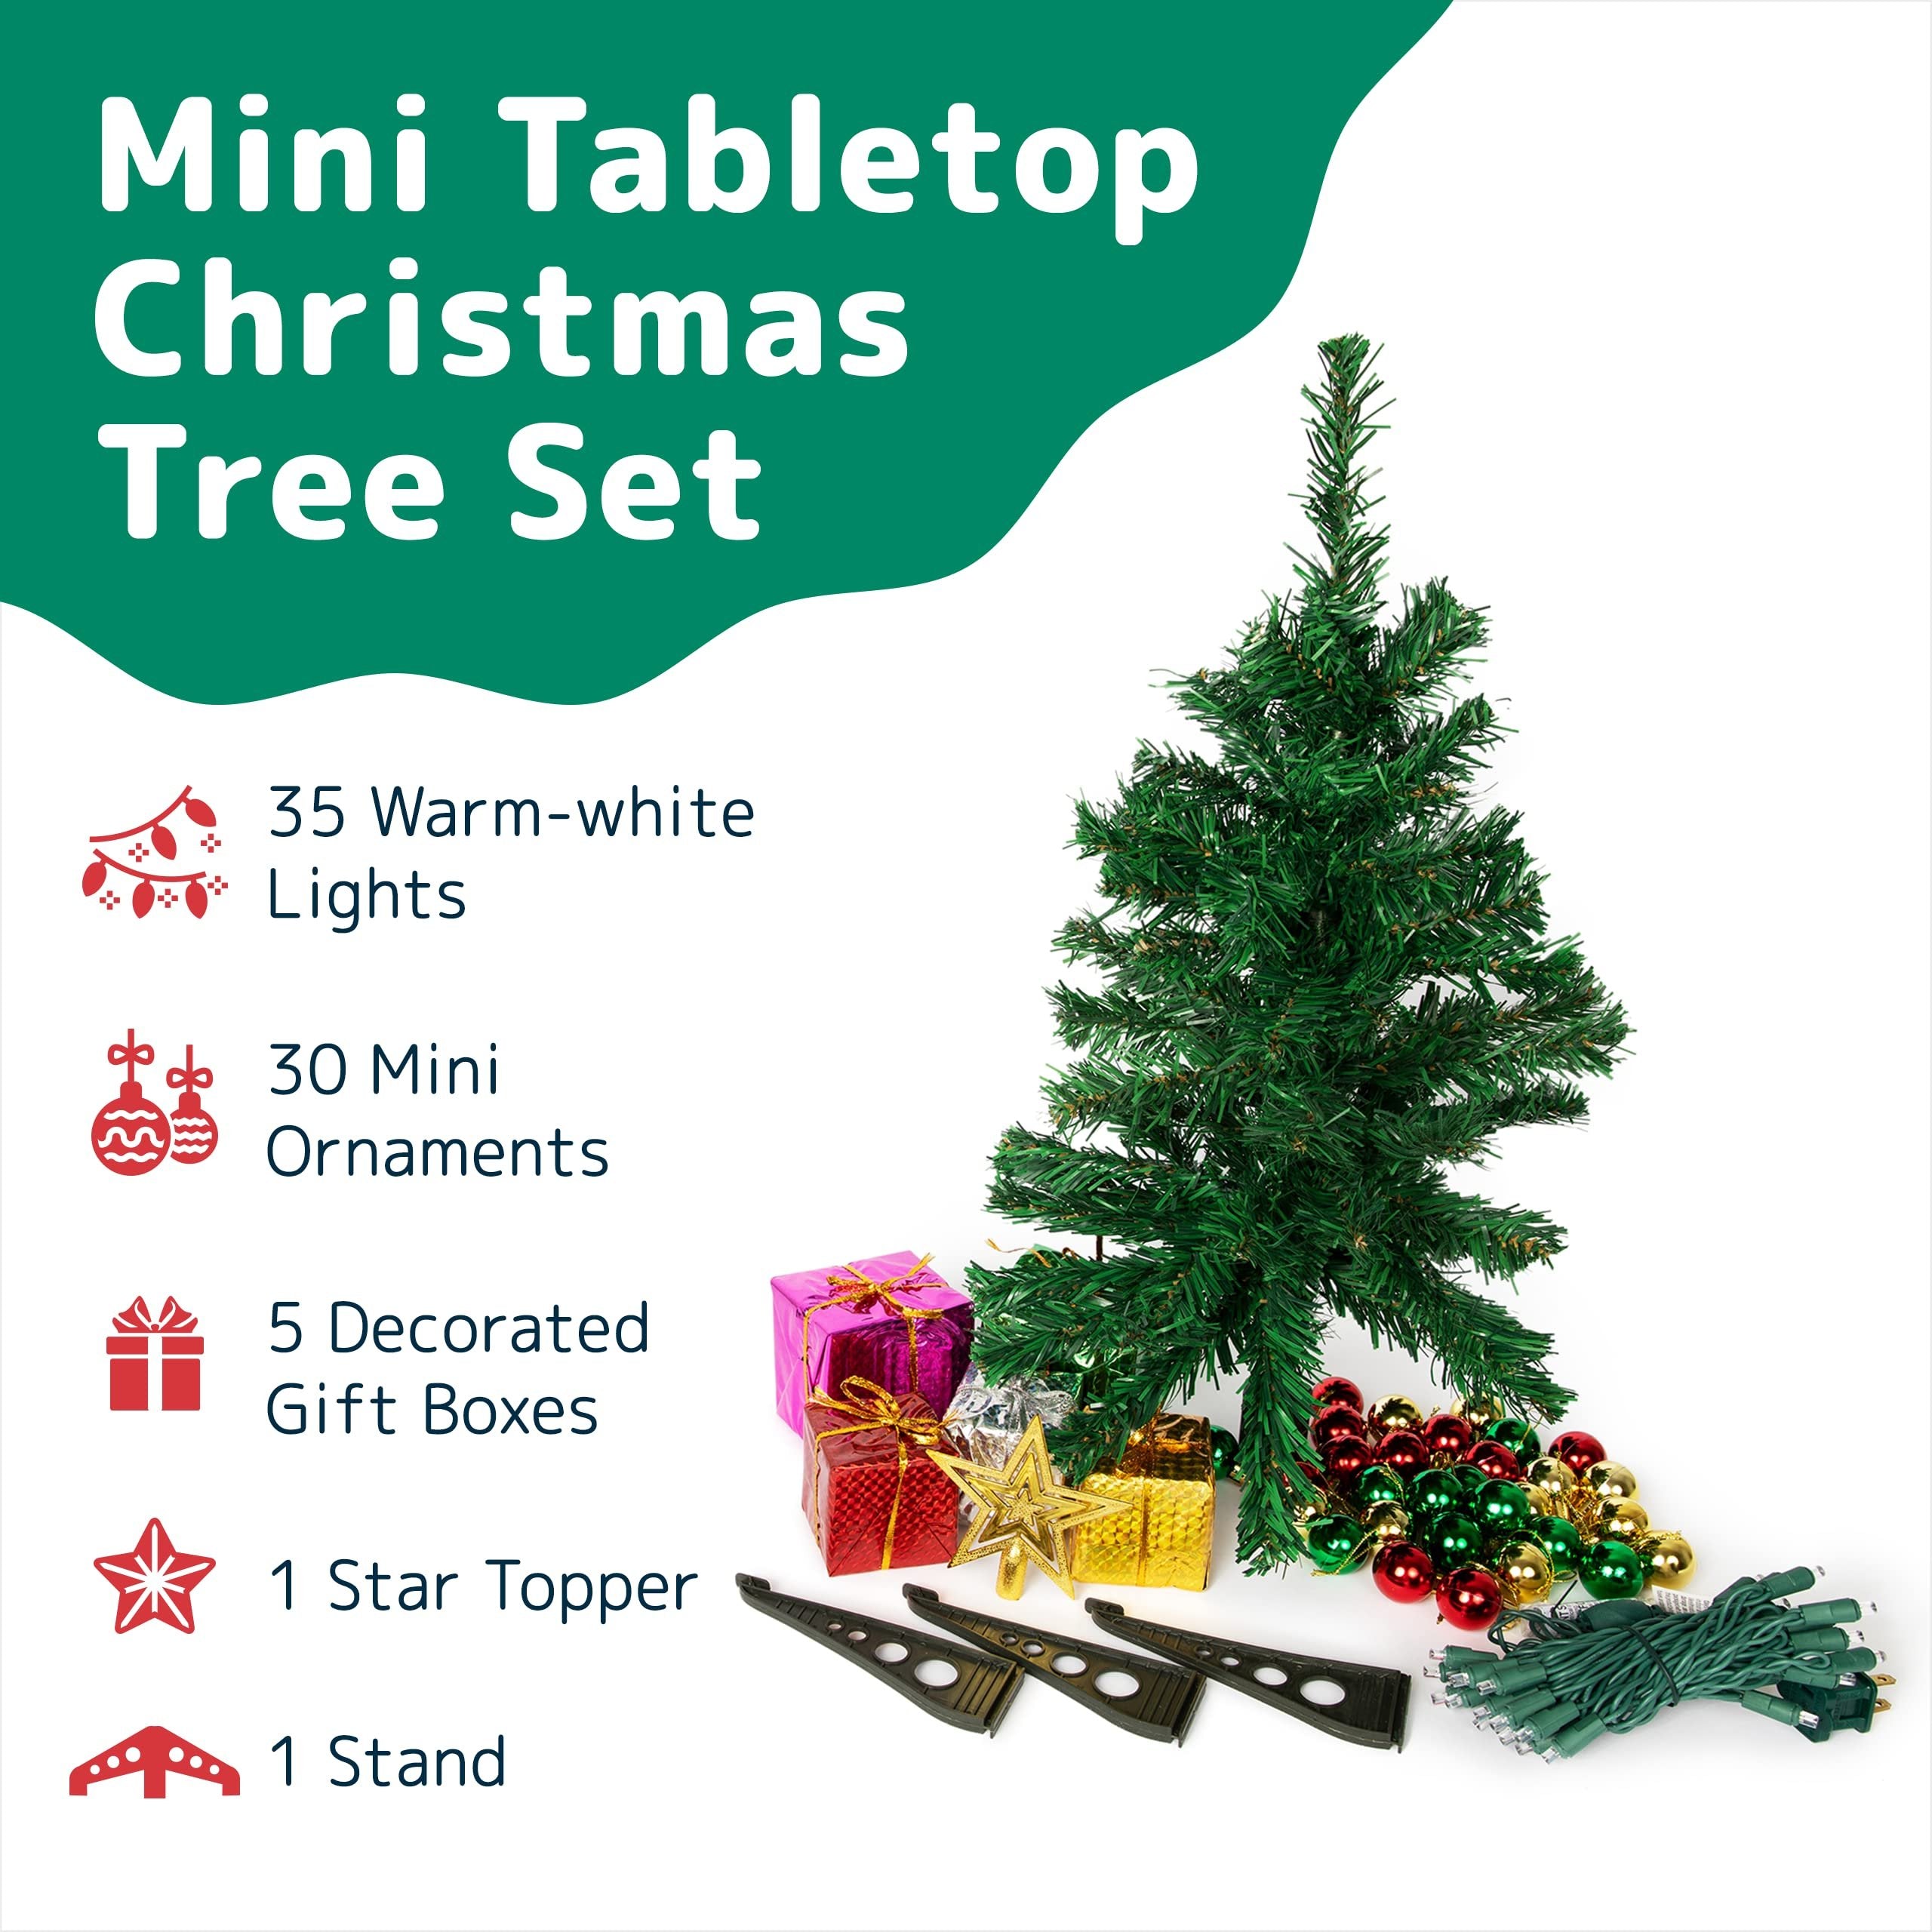 Prextex 23 Inch Tabletop Mini Christmas Tree Set with Warm-White LED Lights, Star Treetopper, Gift Boxes & Hanging Ornaments for Christmas Decorations, Table Top Small Christmas Tree with Lights